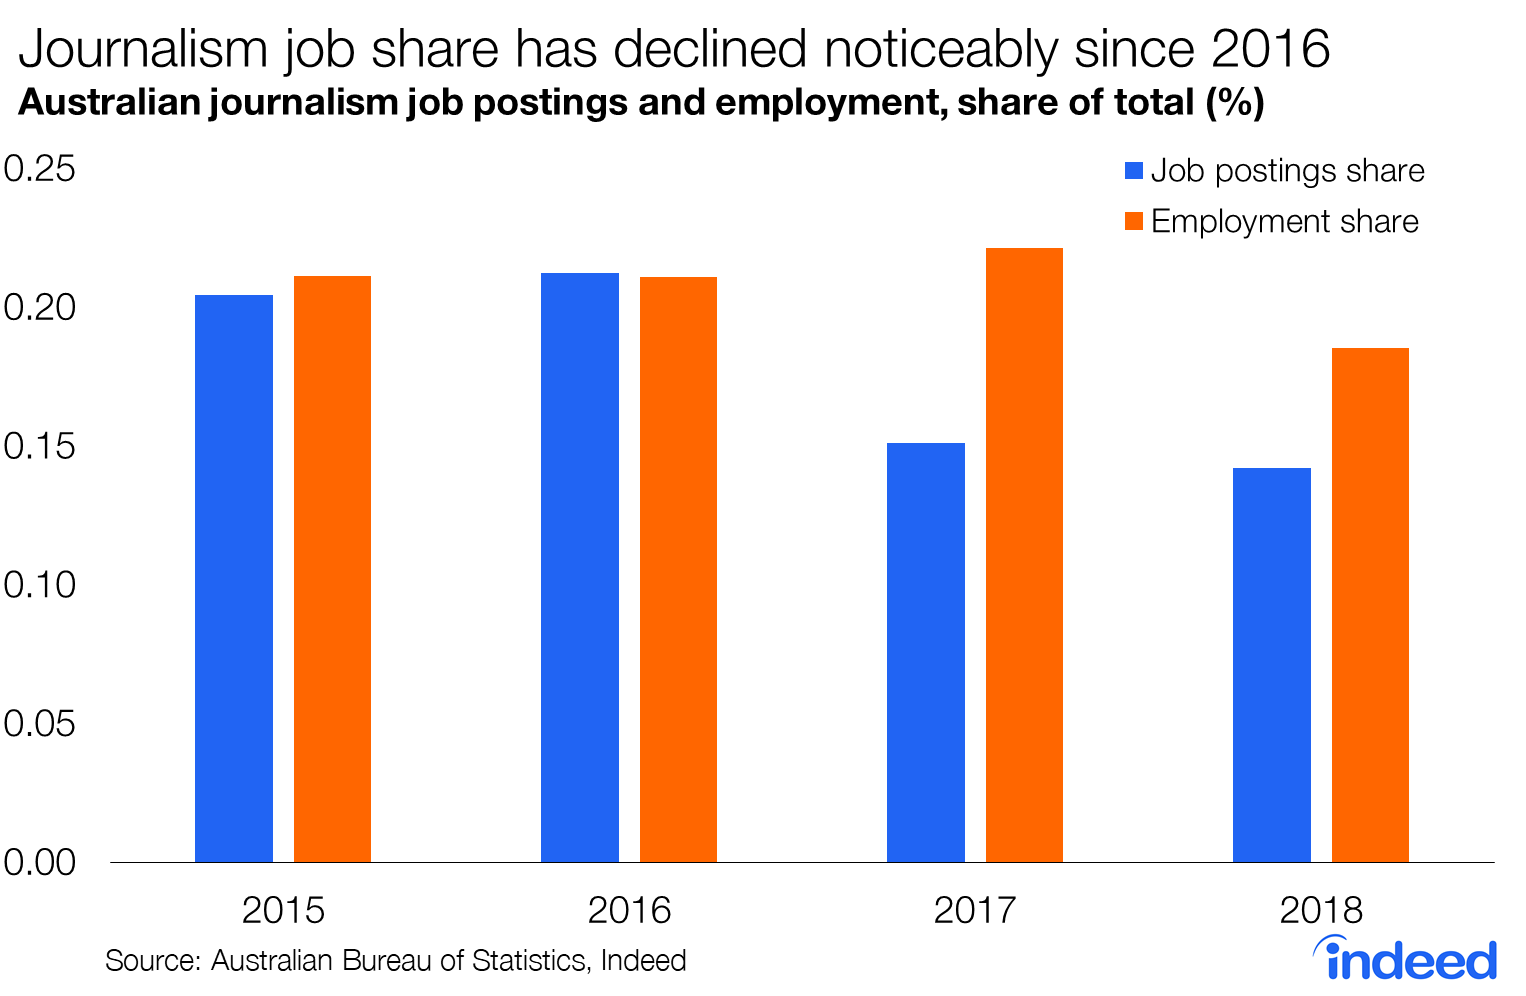 Journalism job share has declined noticeably since 2016